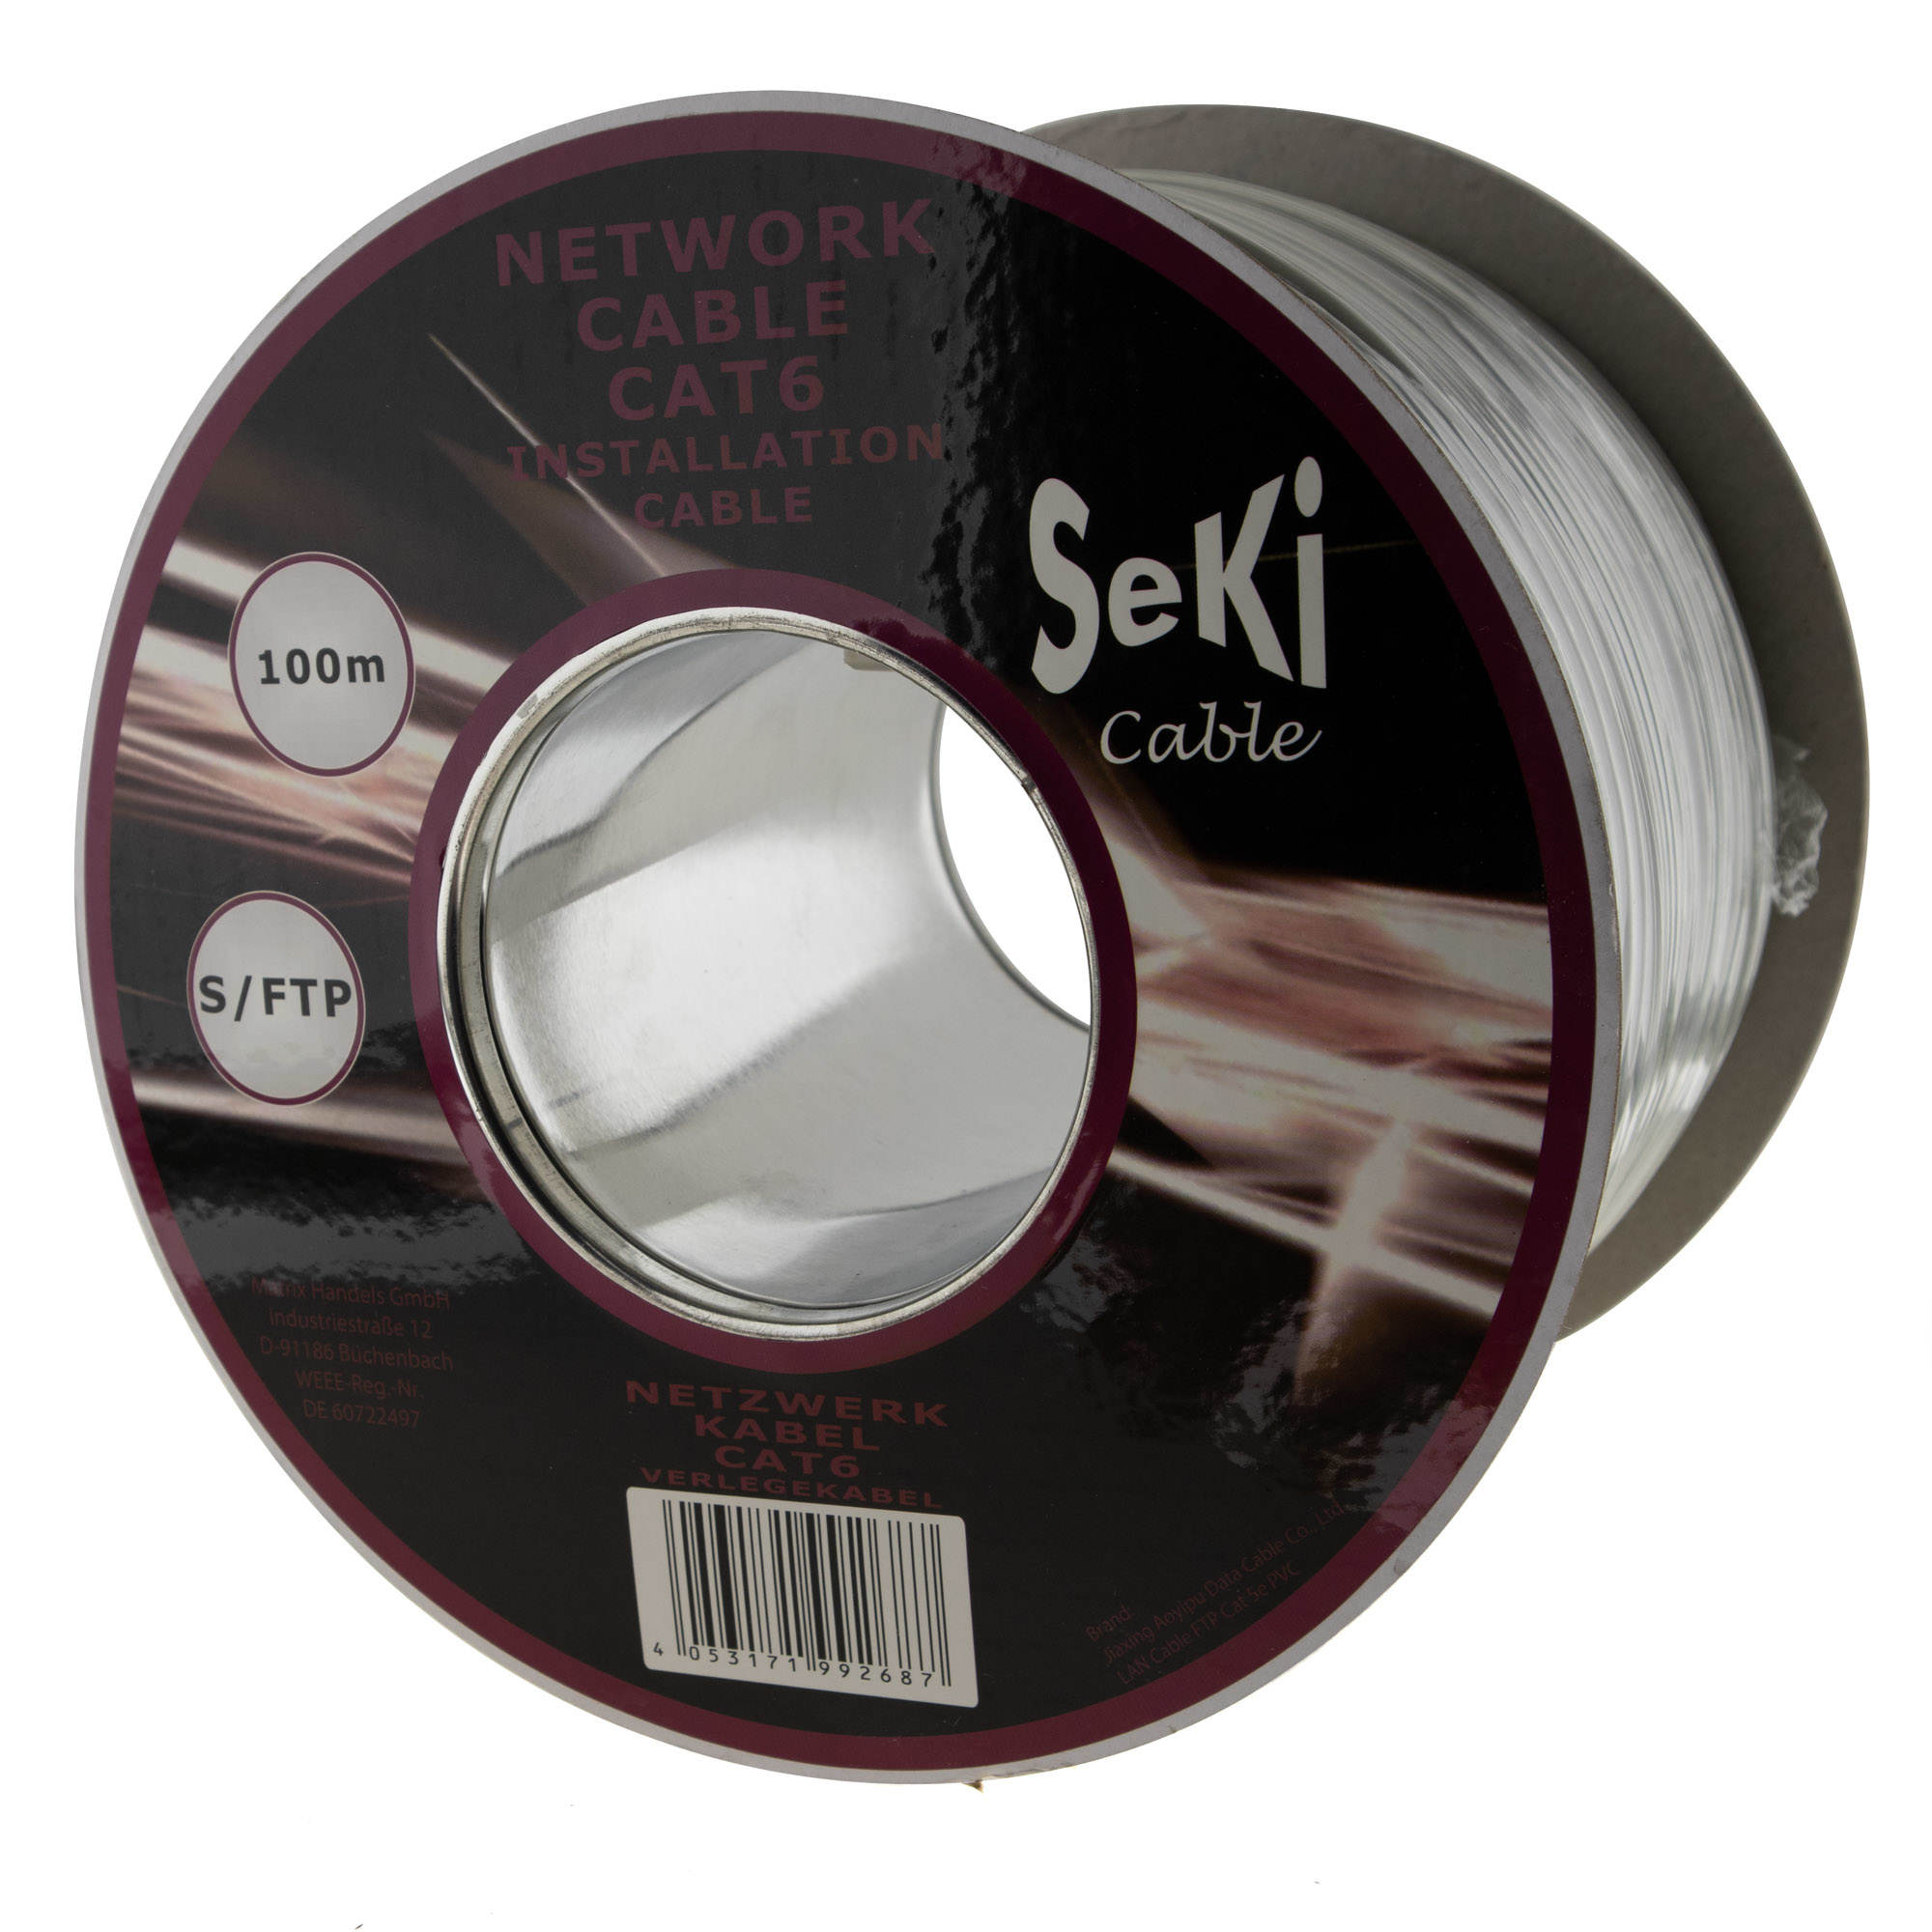 Network cable for installation Cat. 6, 100m